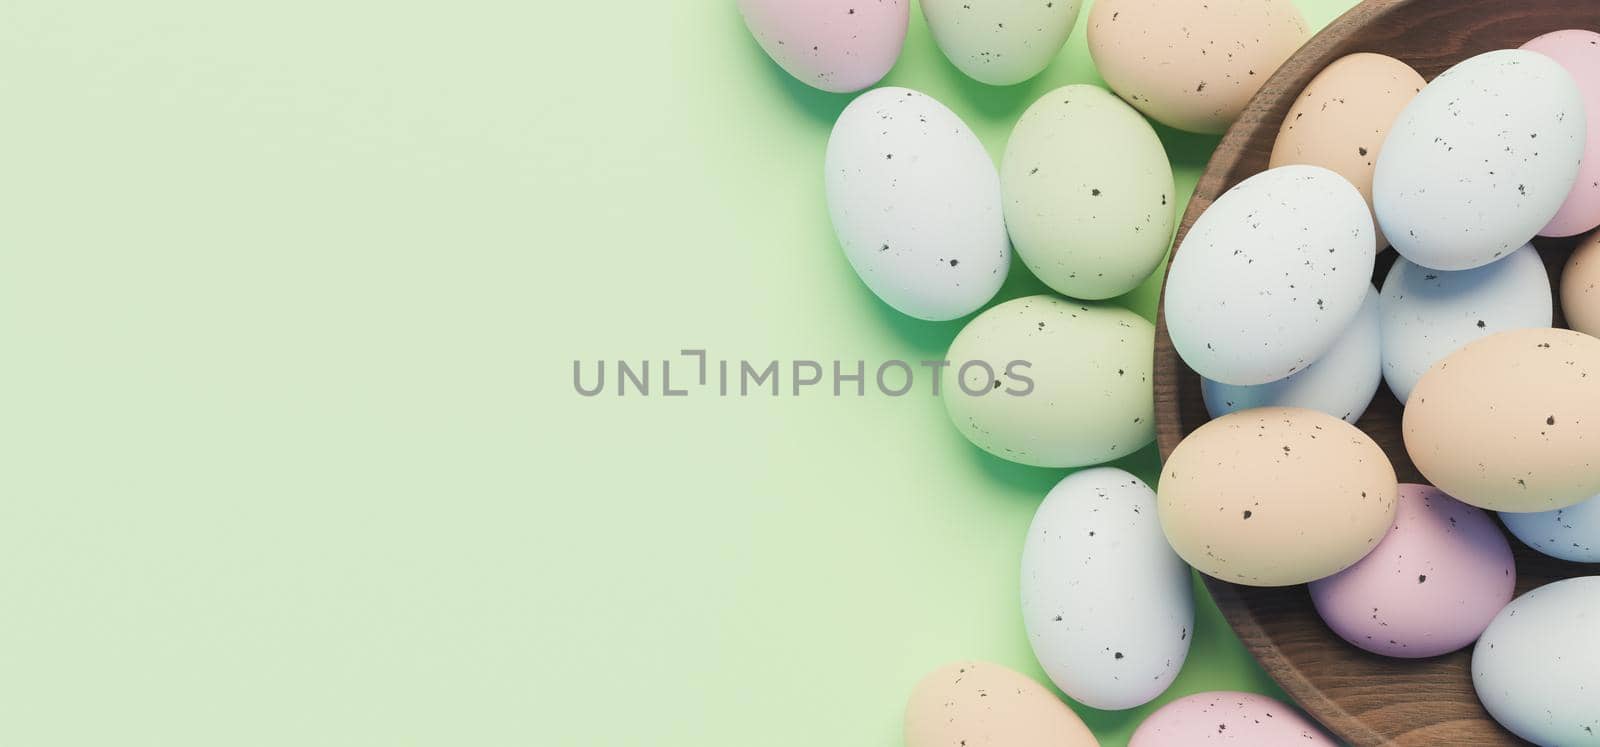 pastel colored eggs on a green background by asolano